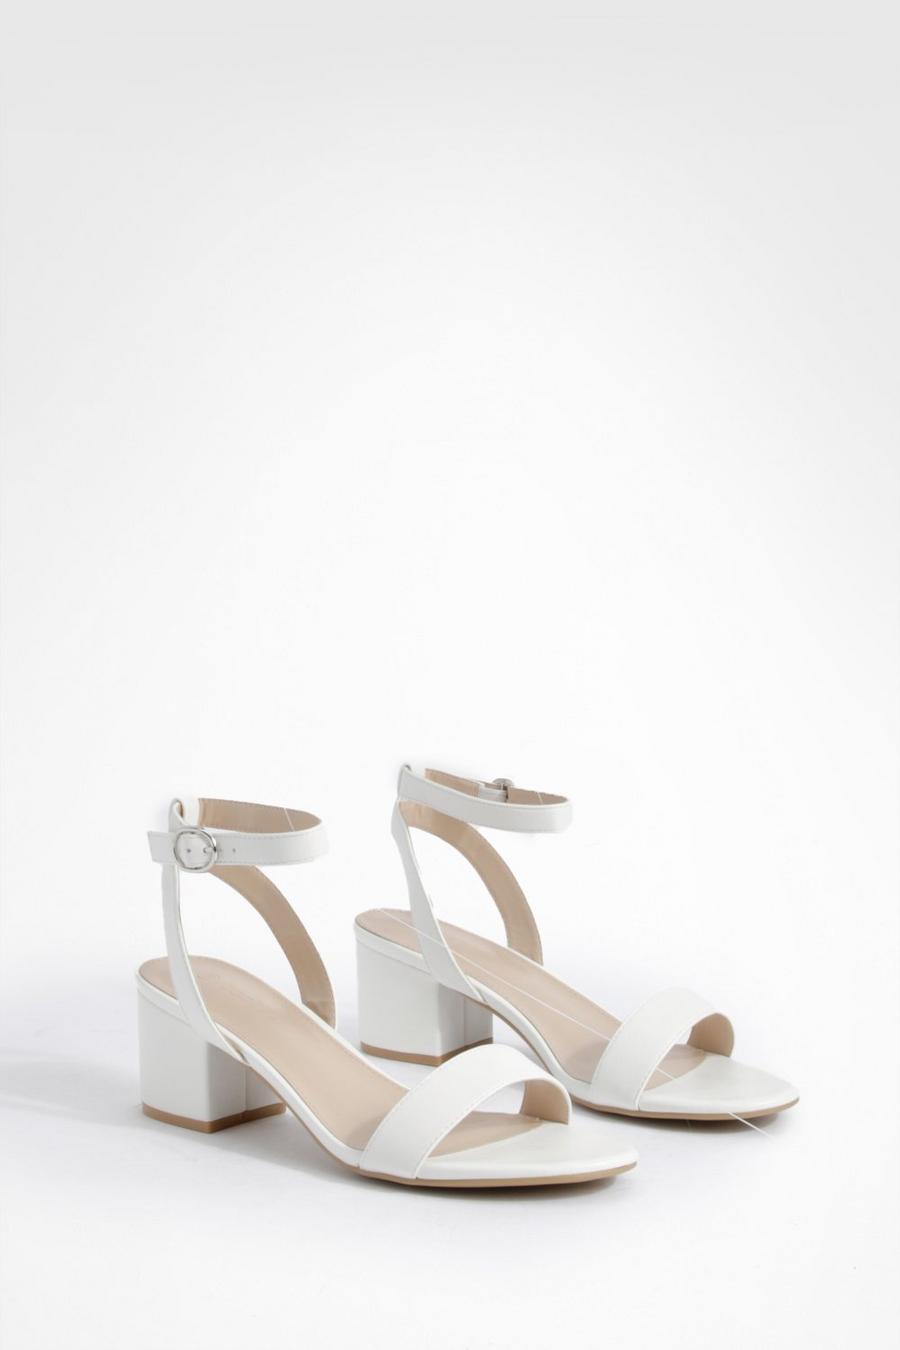 White Wide Fit Low Block Barely There Heels   